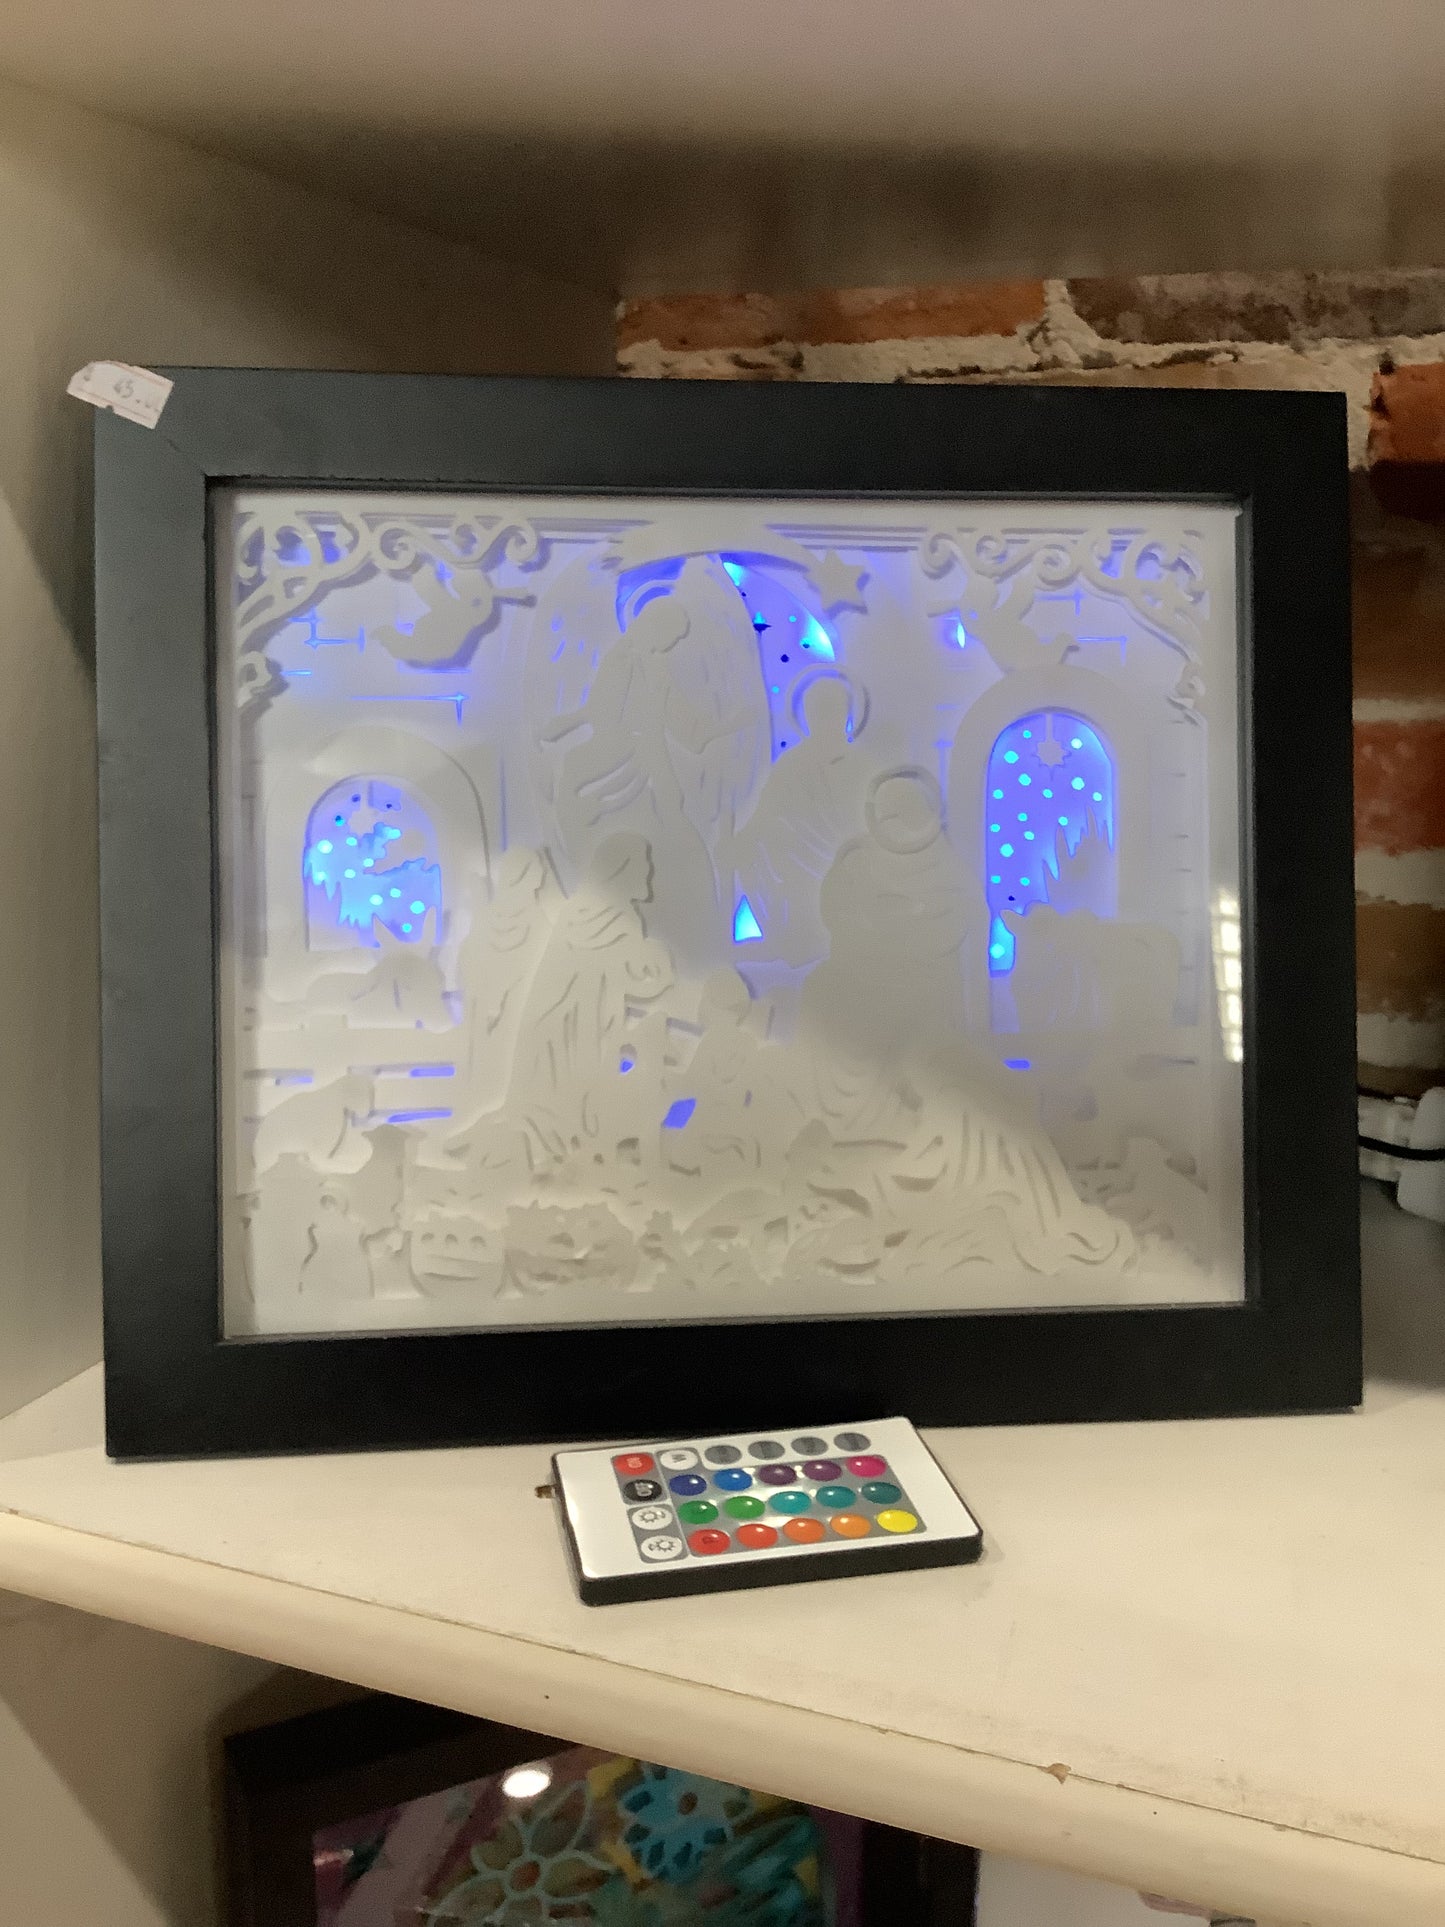 8 x 10” black shadowbox with paper cut nativity scene and lights